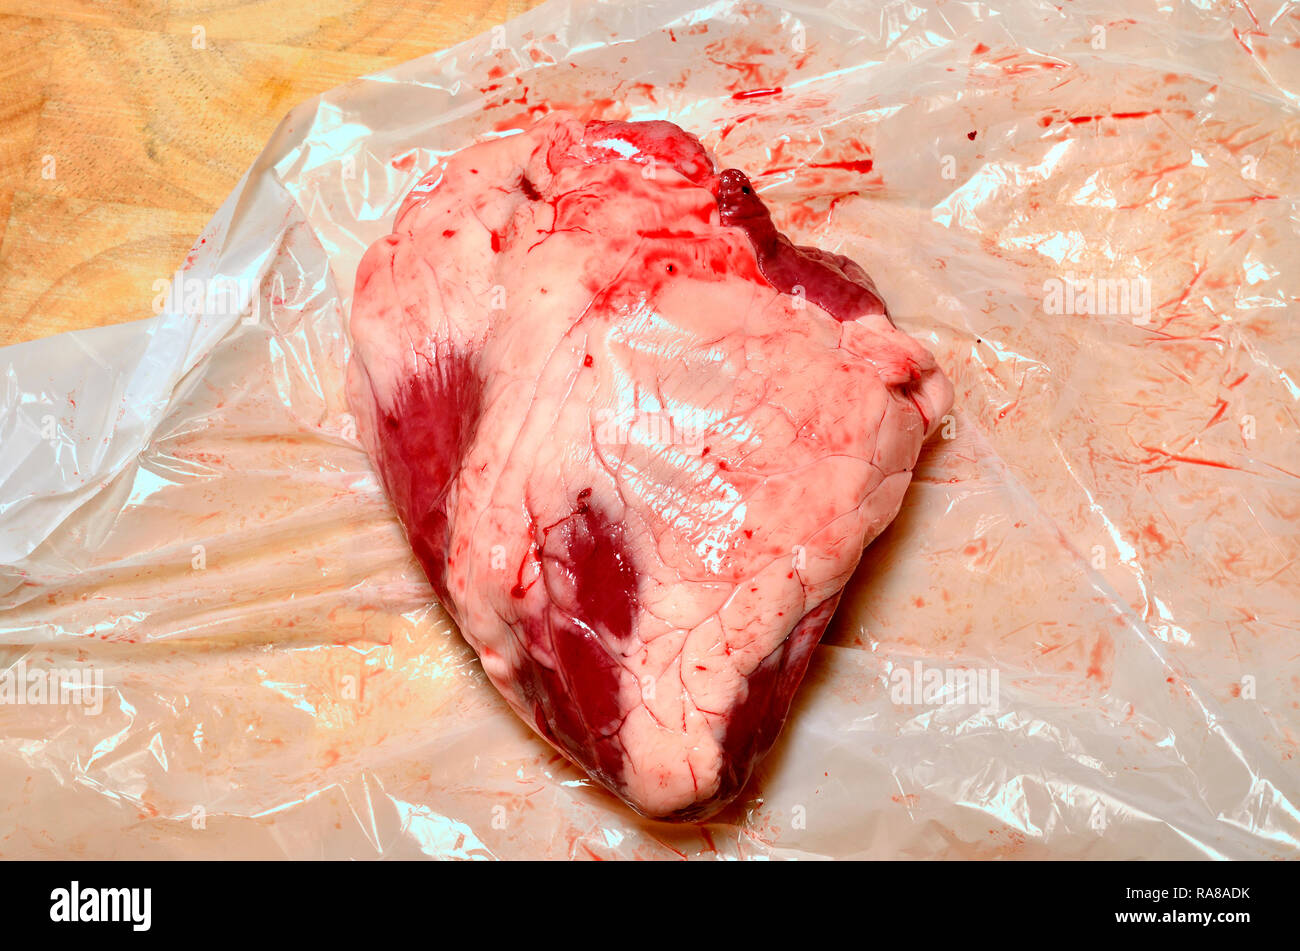 Lamb's heart bought from a supermarket. Stock Photo